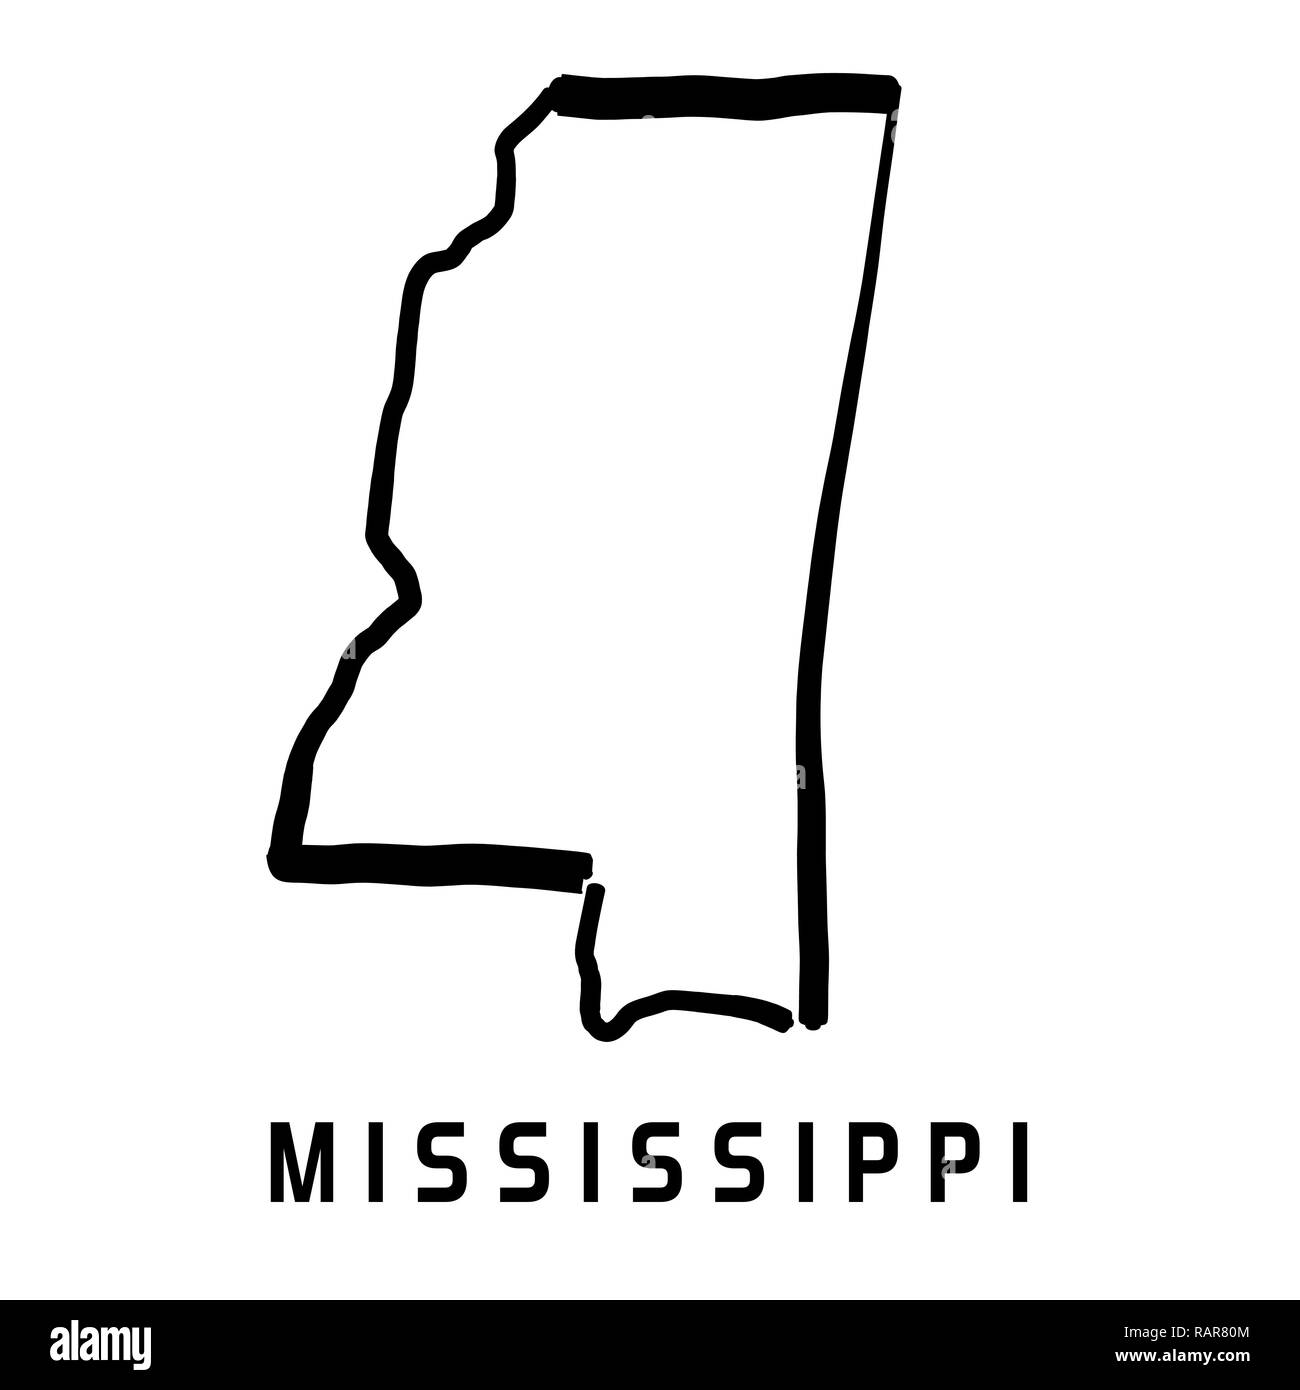 Mississippi state map outline - smooth simplified US state shape map vector. Stock Vector